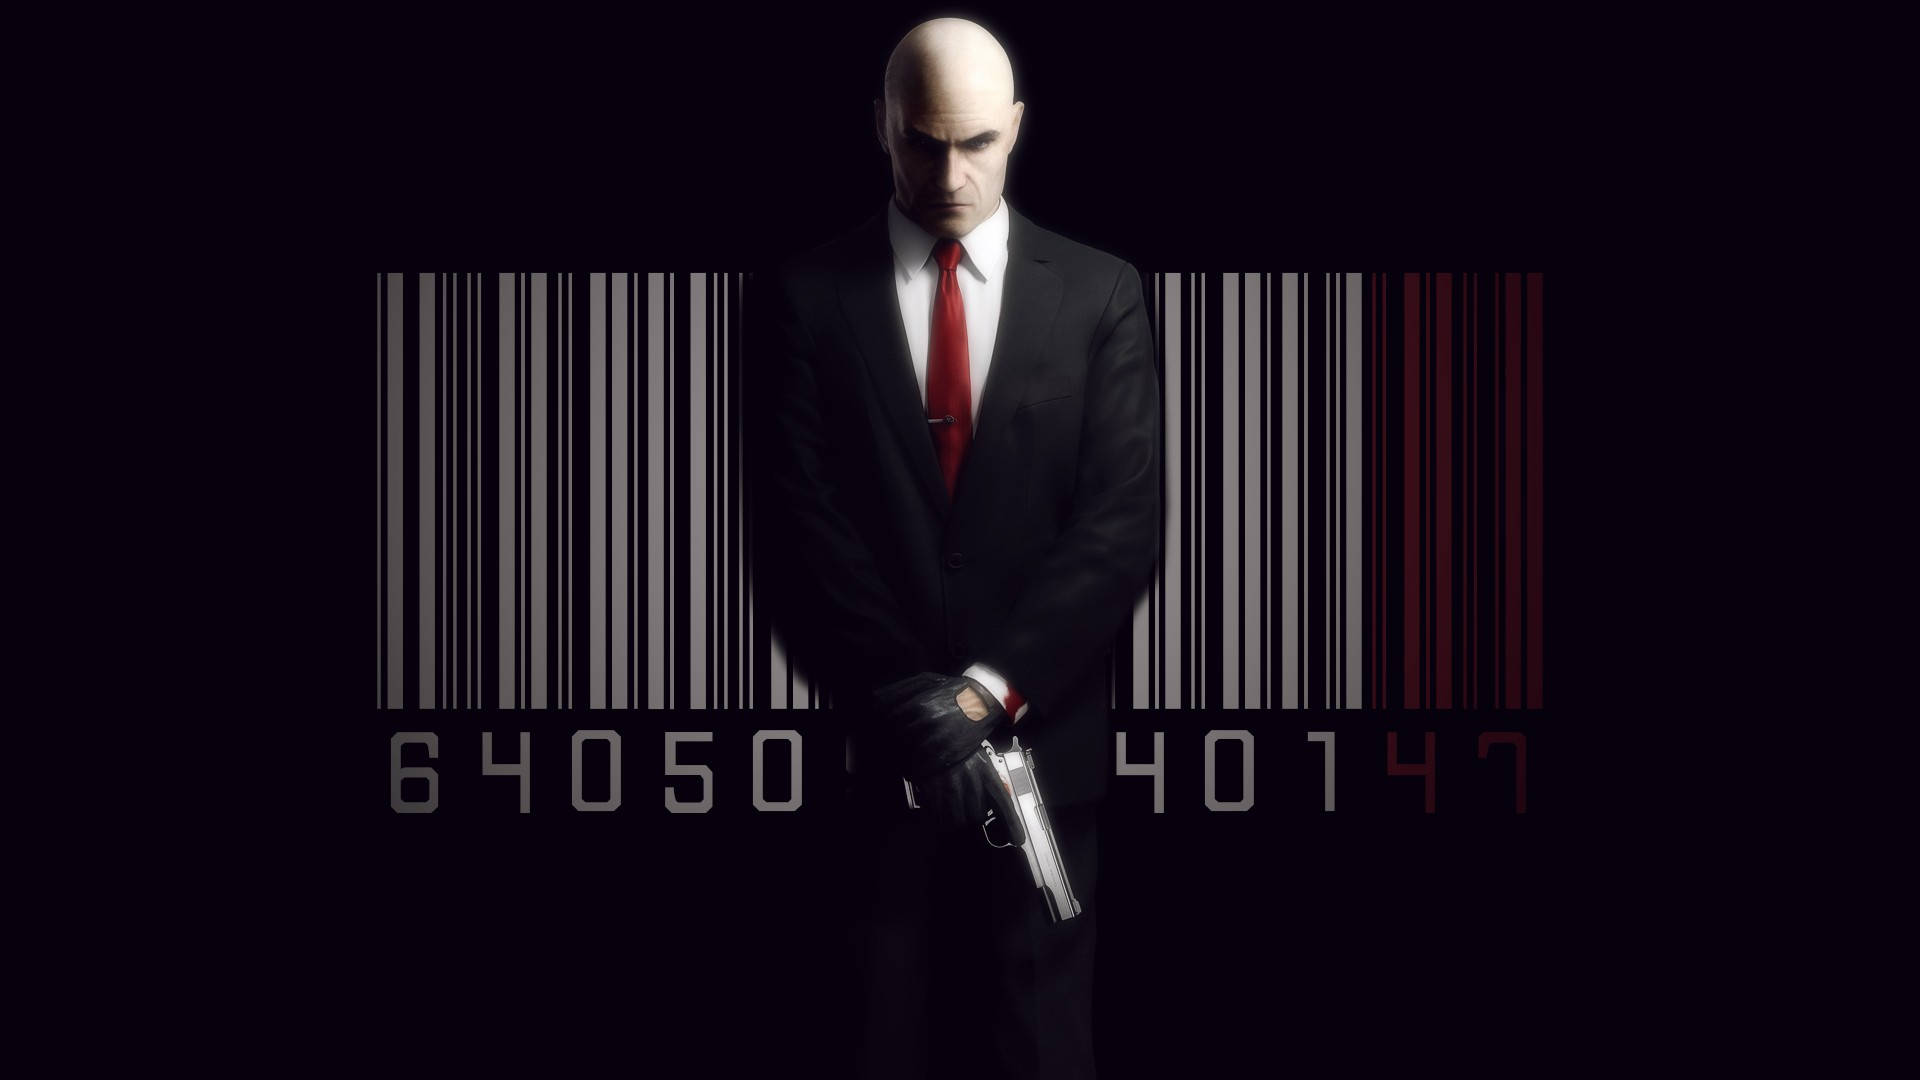 Hitman With Barcode